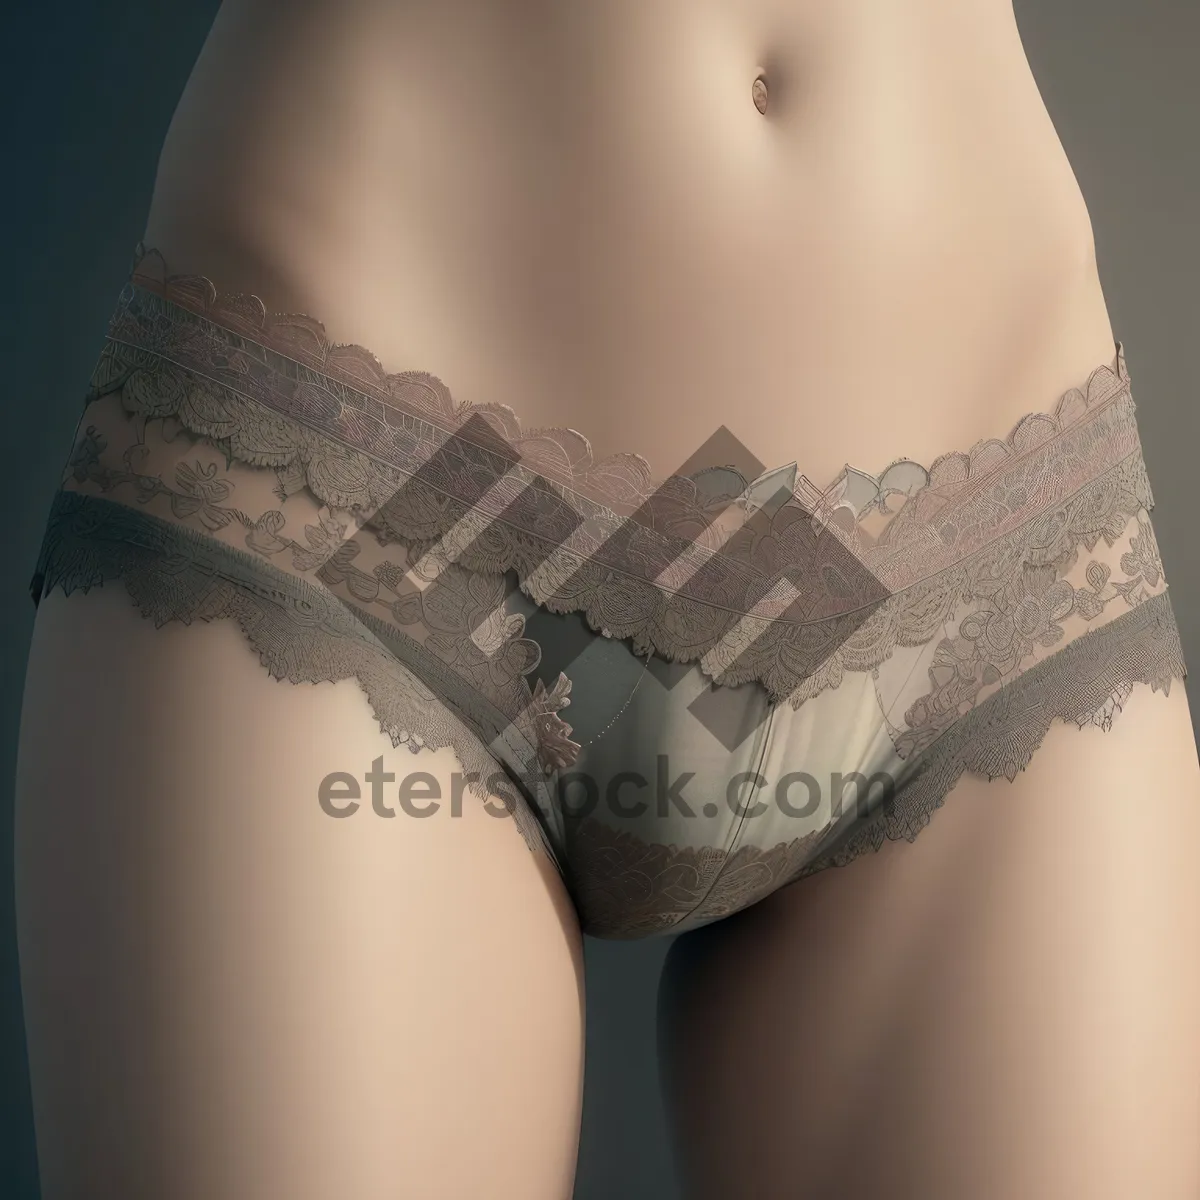 Picture of Seductive Lingerie Showcase: Sensual Silhouette of a Beautiful Lady